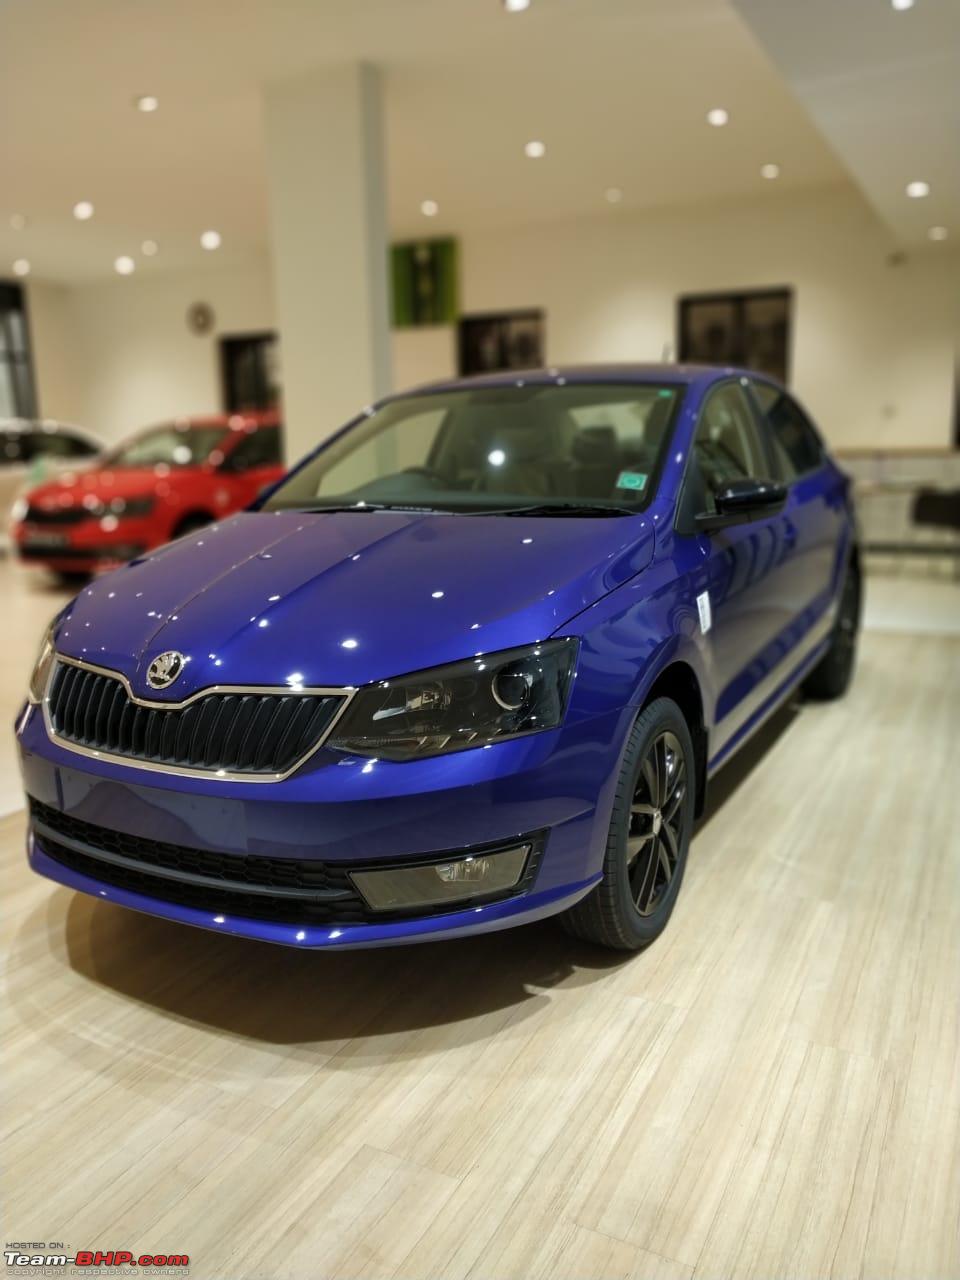 Skoda Rapid Onyx Launched At Rs 9 75 Lakh Team Bhp